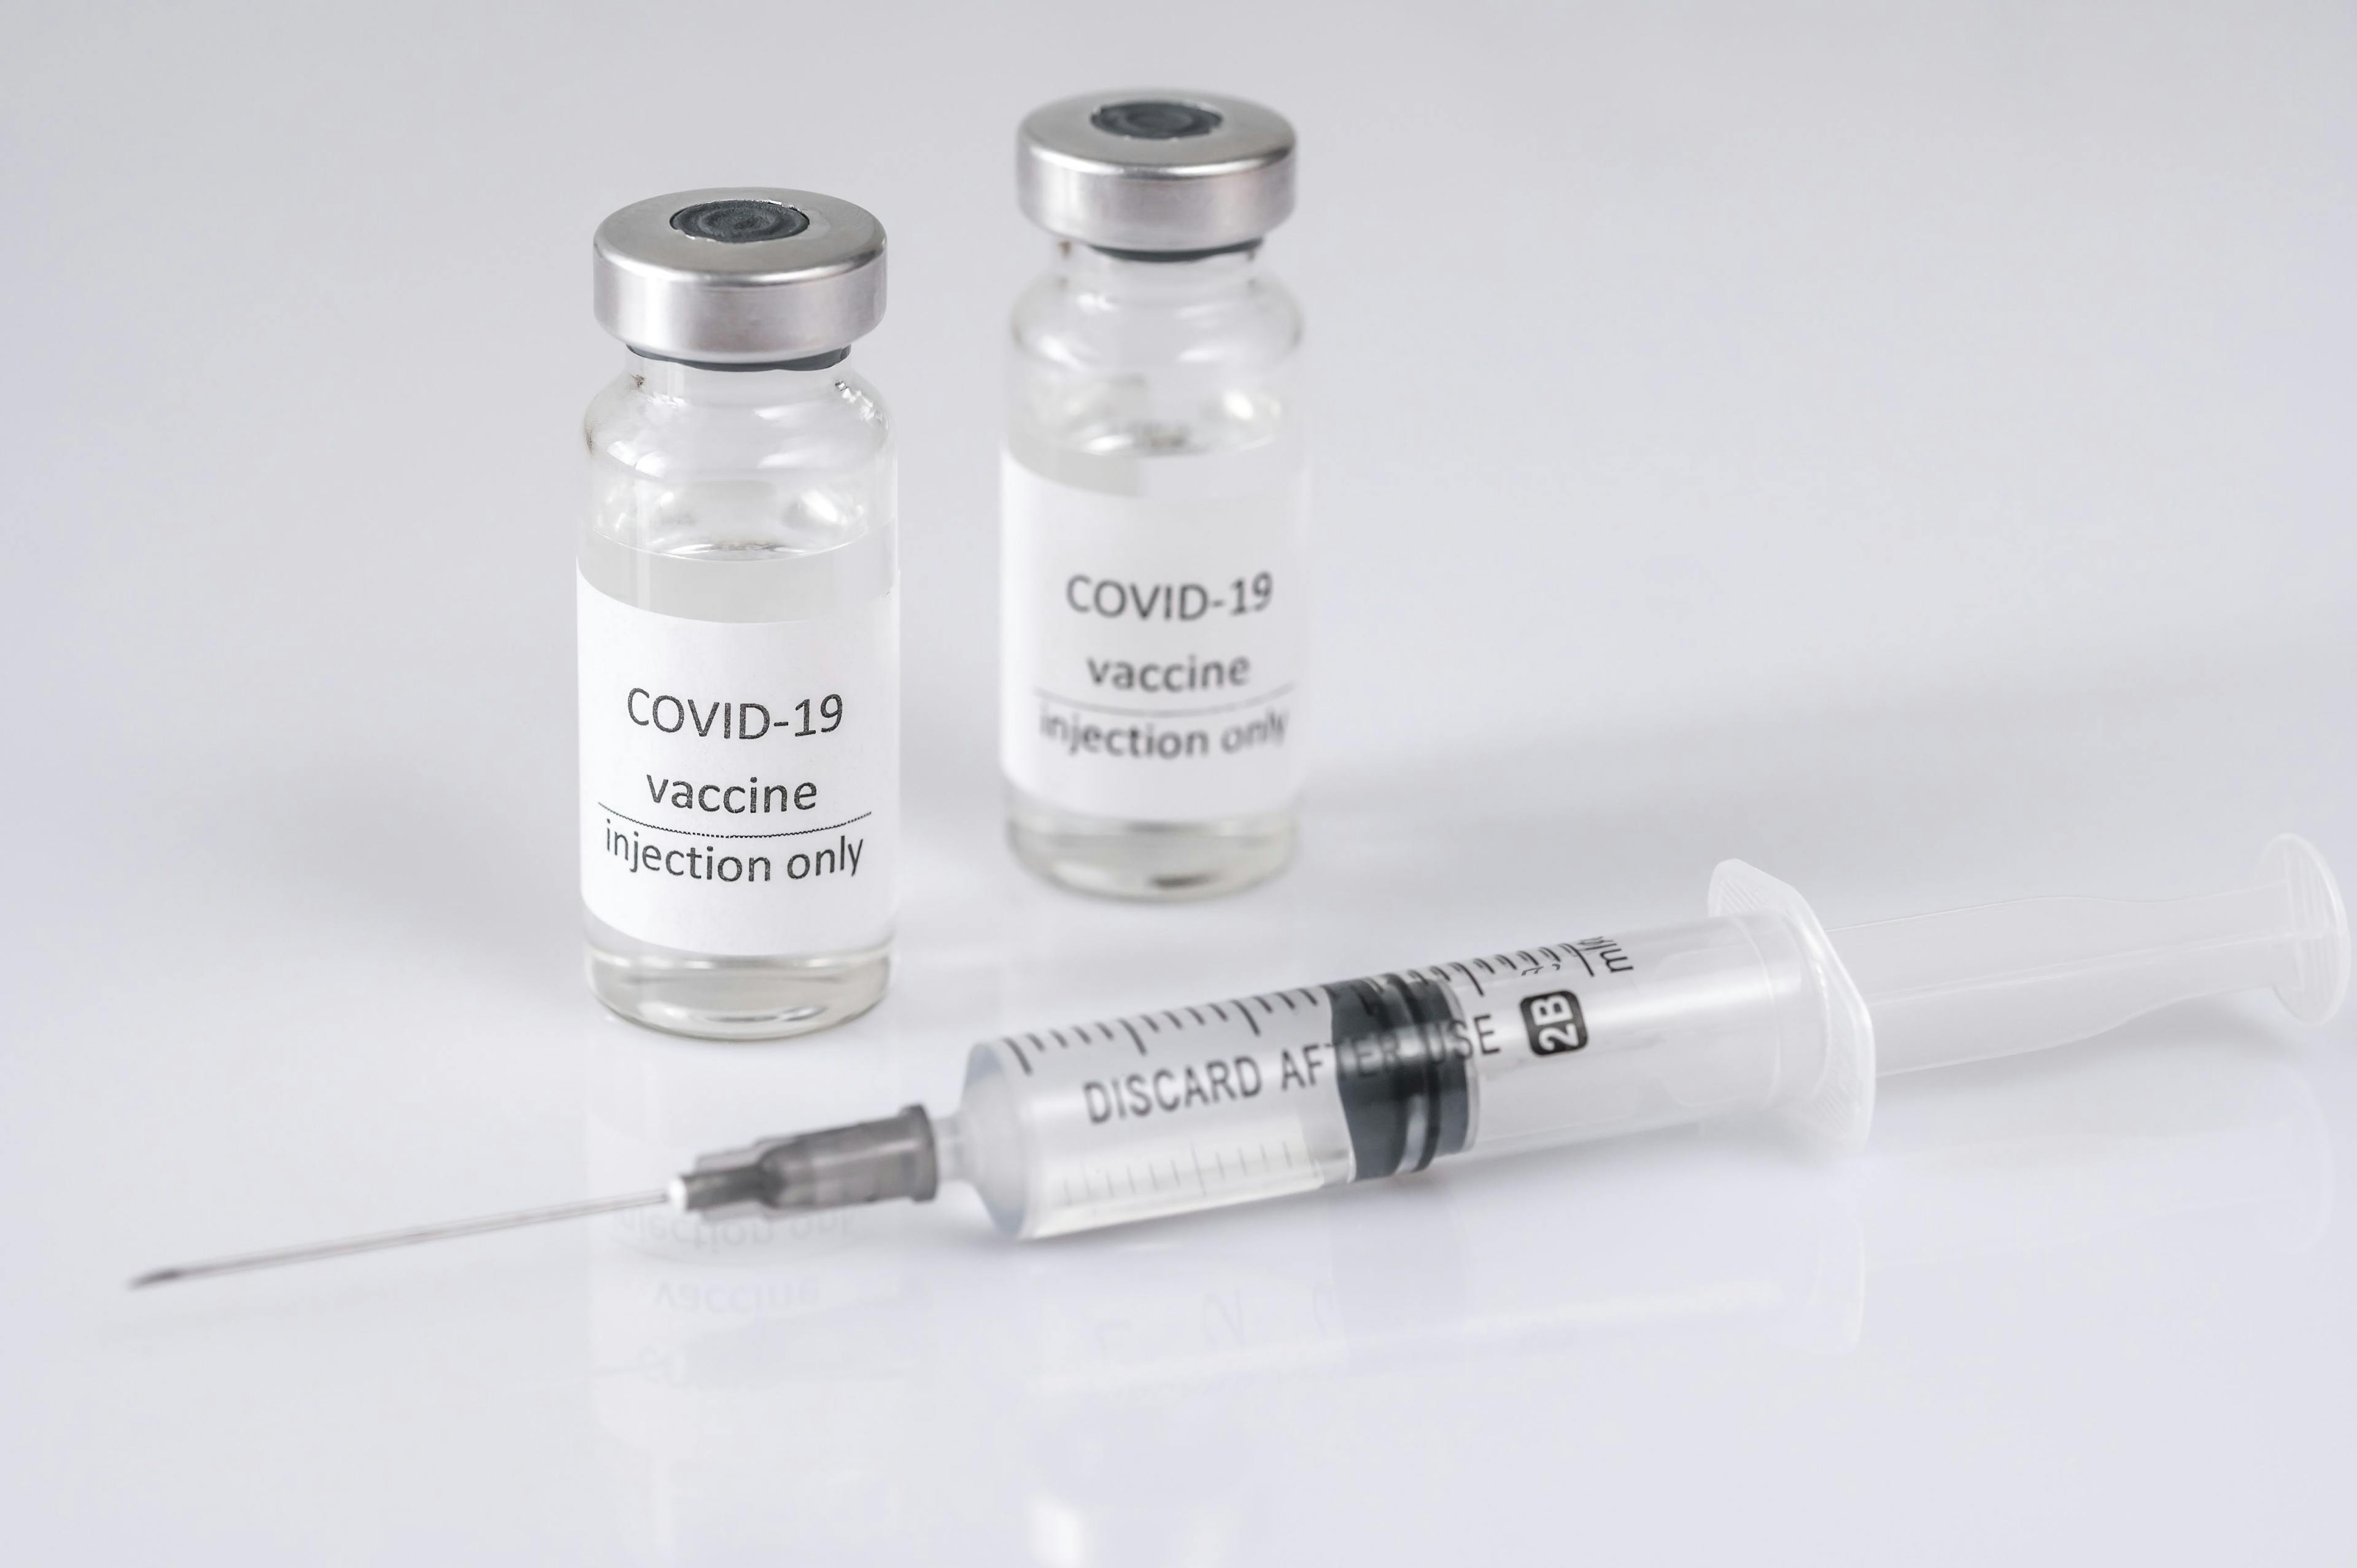 Adults living with HIV were more likely to have a breakthrough COVID-19 infection after vaccination, suggesting a need for additional vaccine doses in this population.